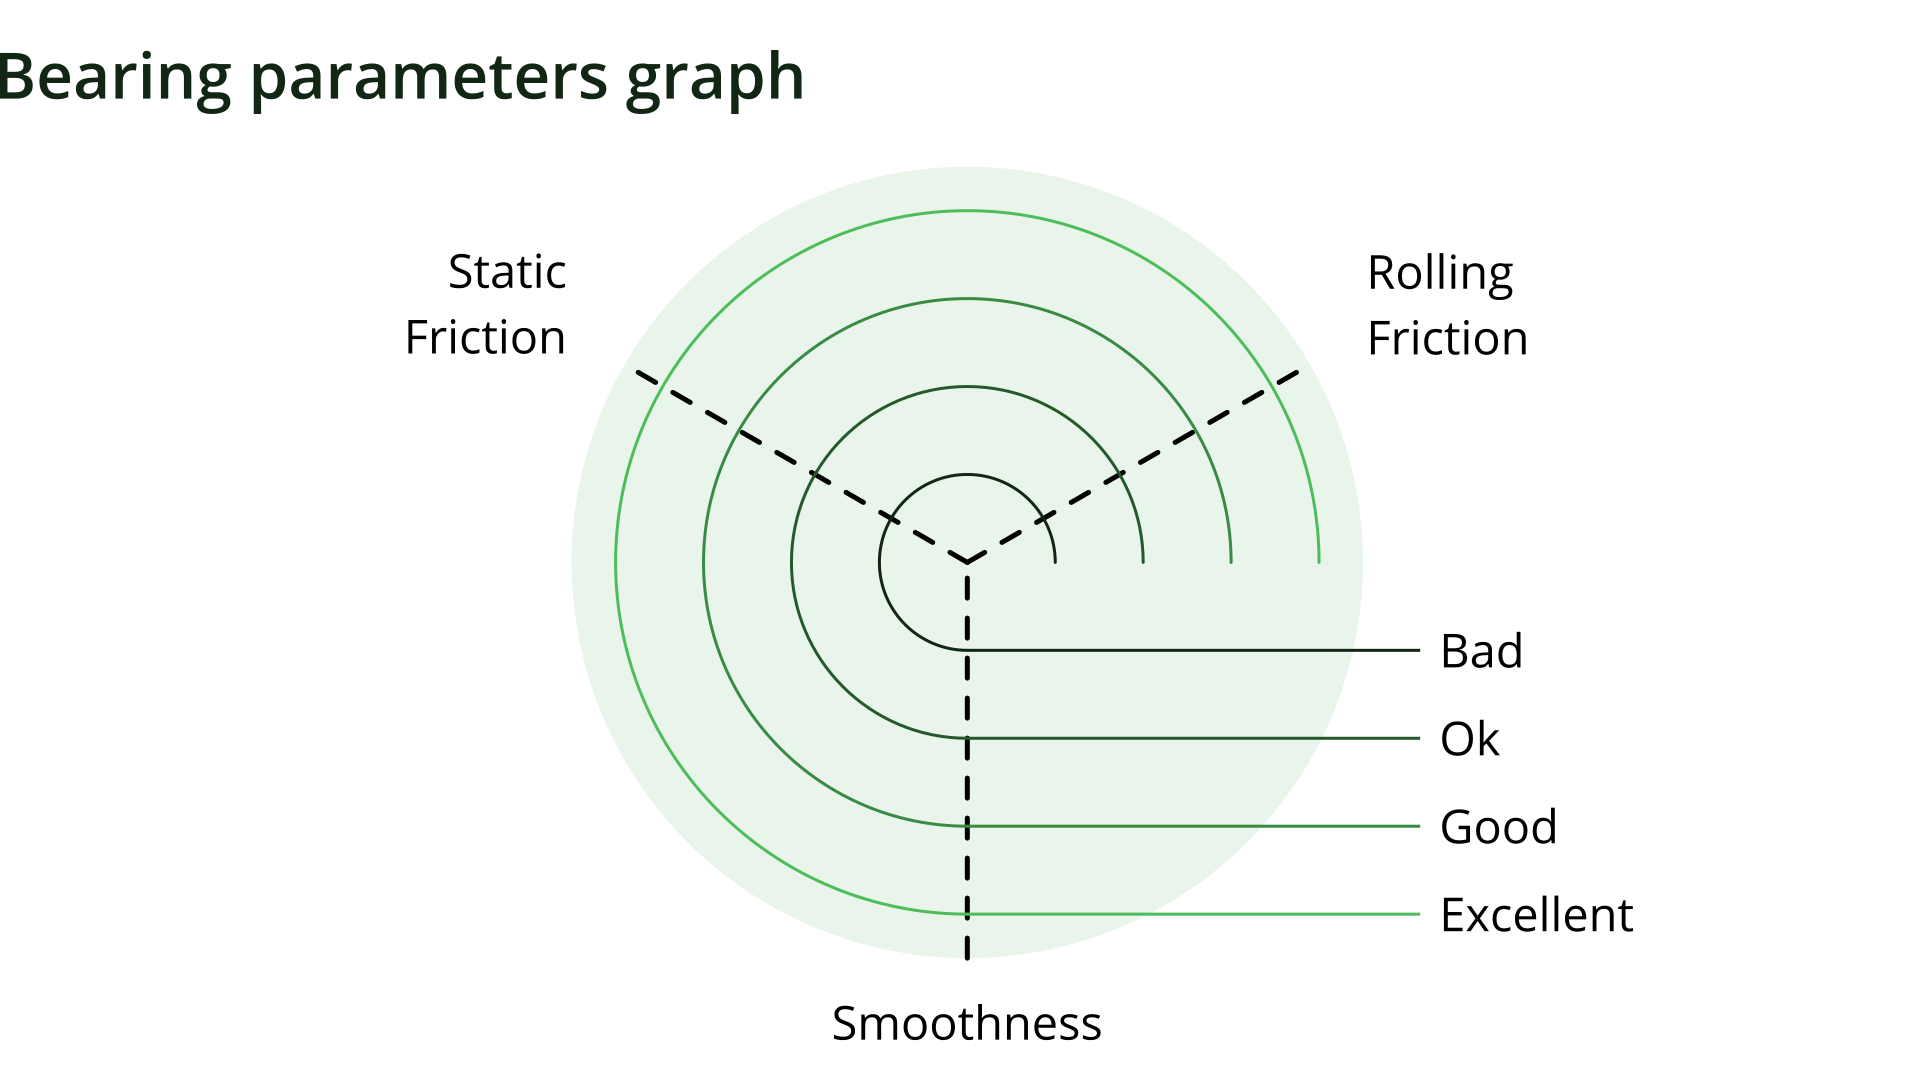 Blank radial graph with static friction, rolling friction, smoothness axes